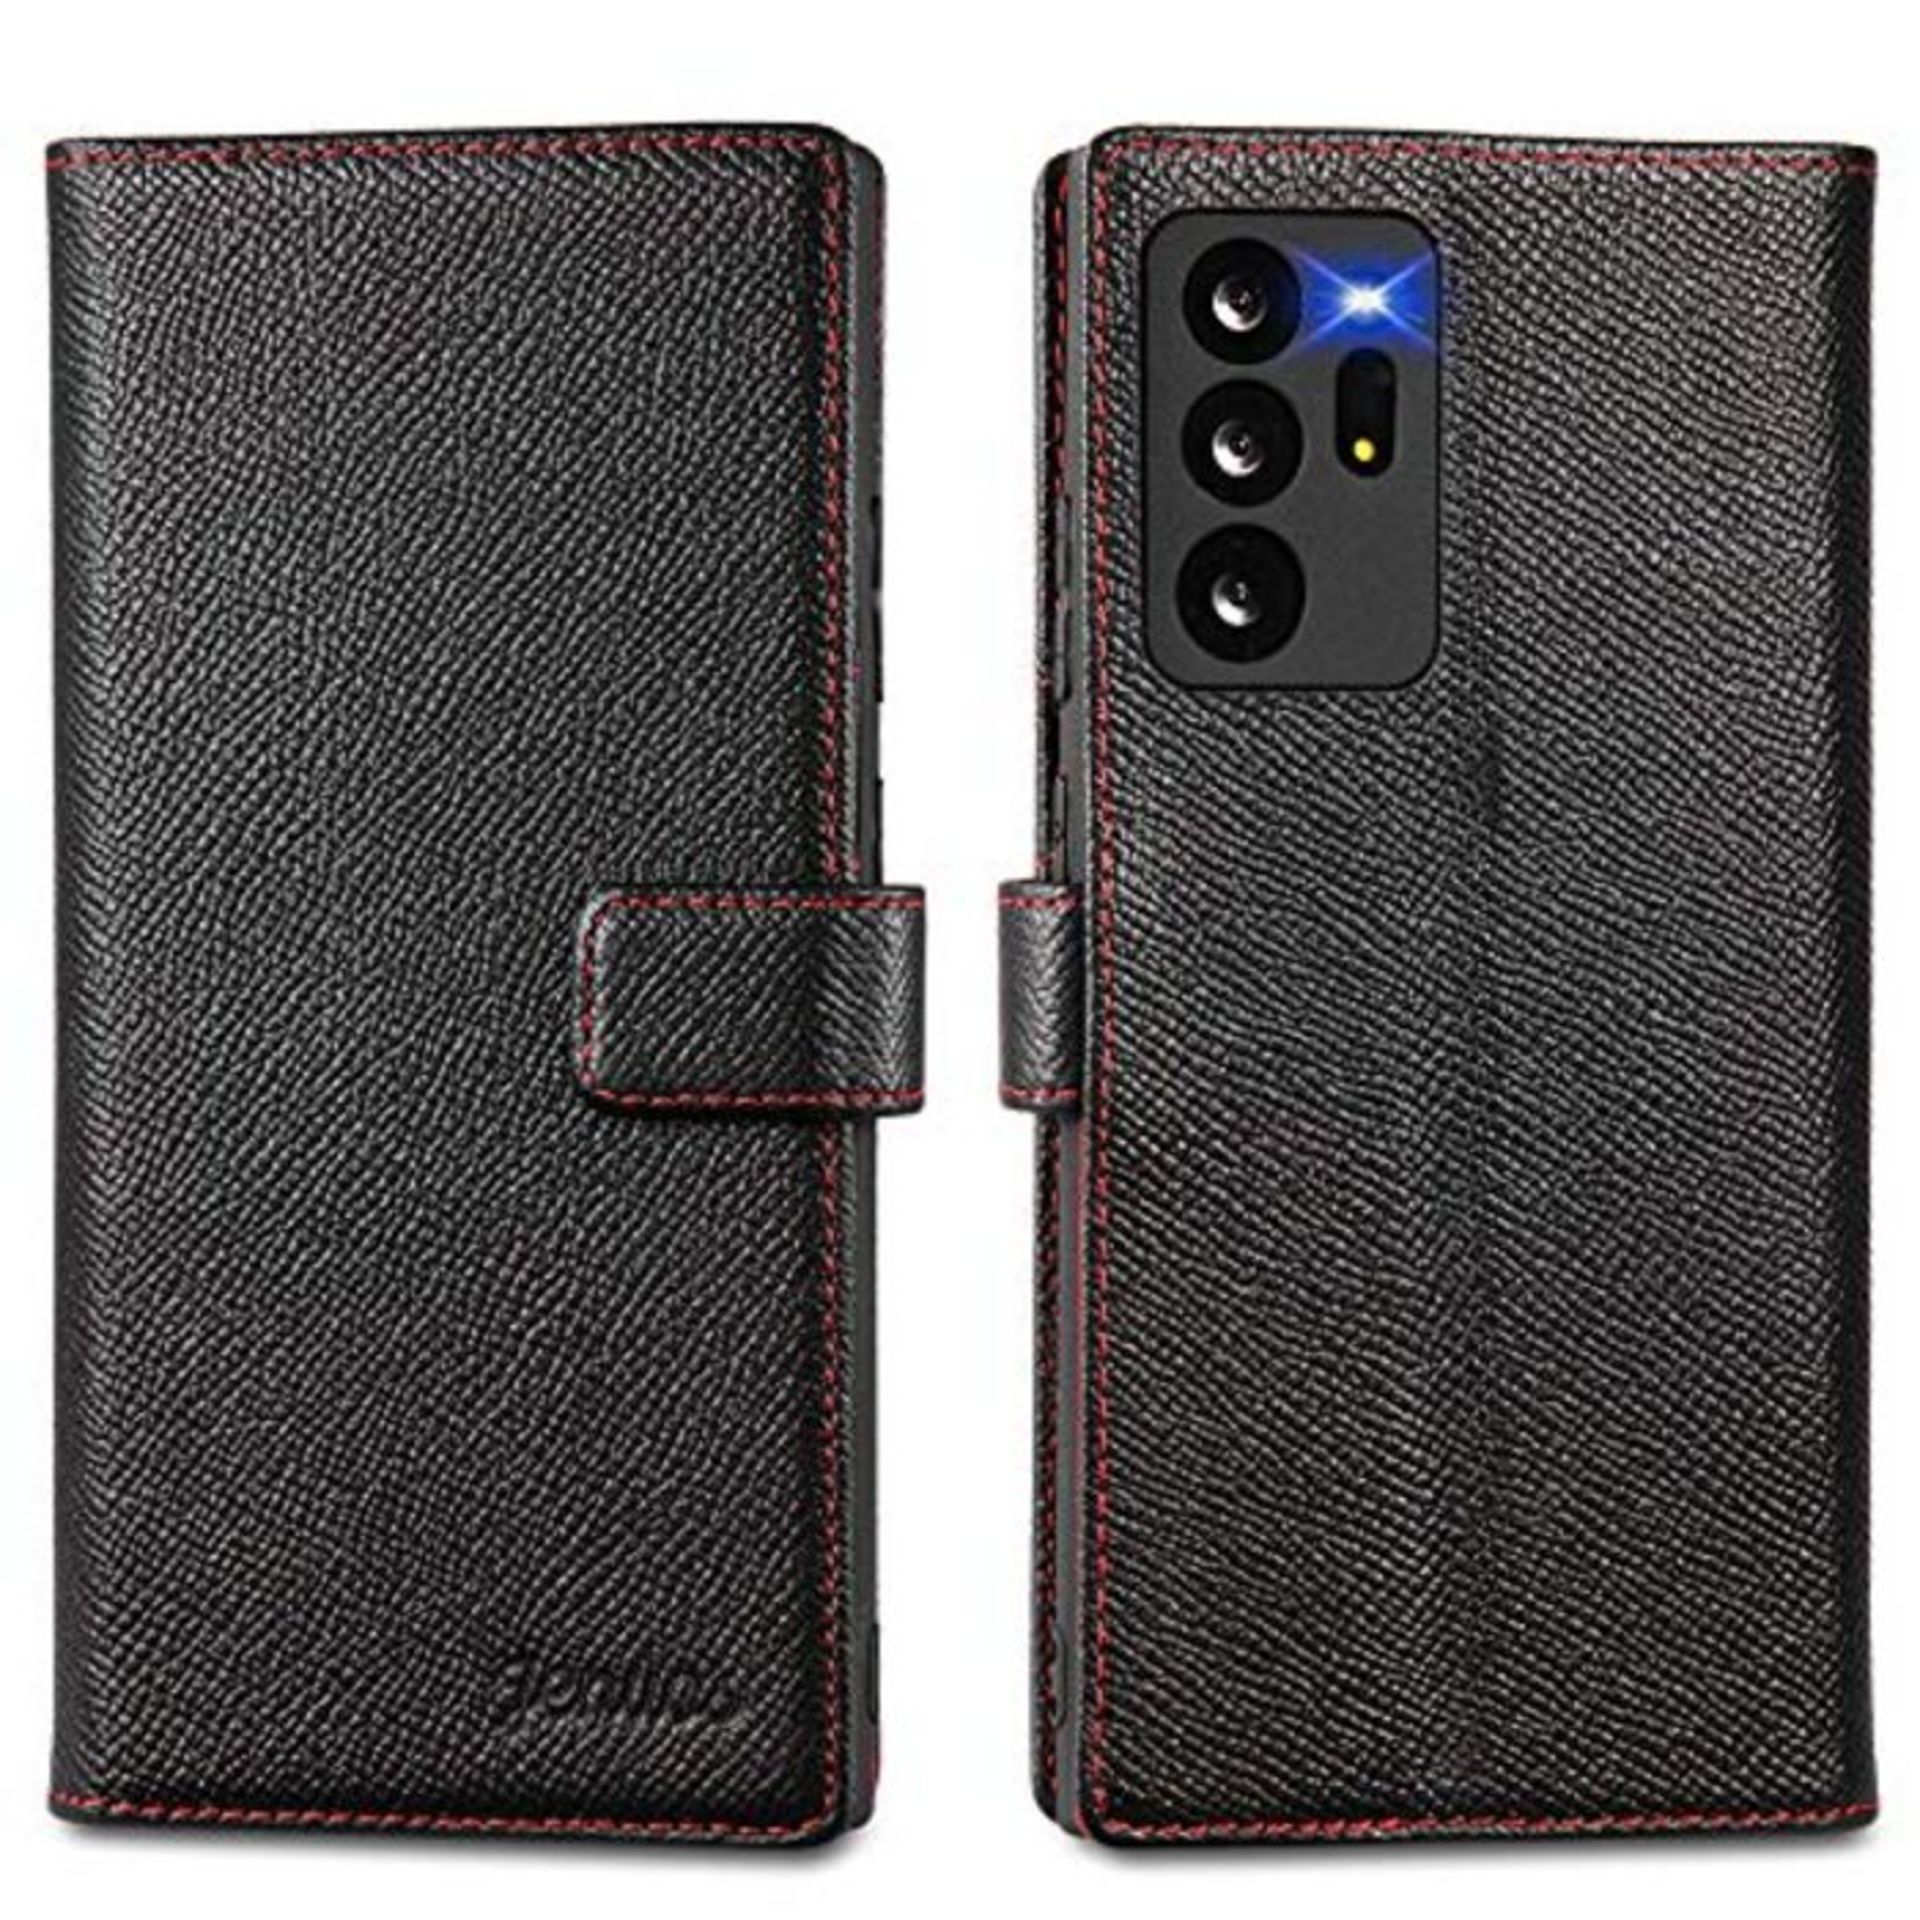 Jenuos Samsung Galaxy Note 20 Ultra/Note 20 Ultra 5G Case, Genuine Leather Flip Wallet